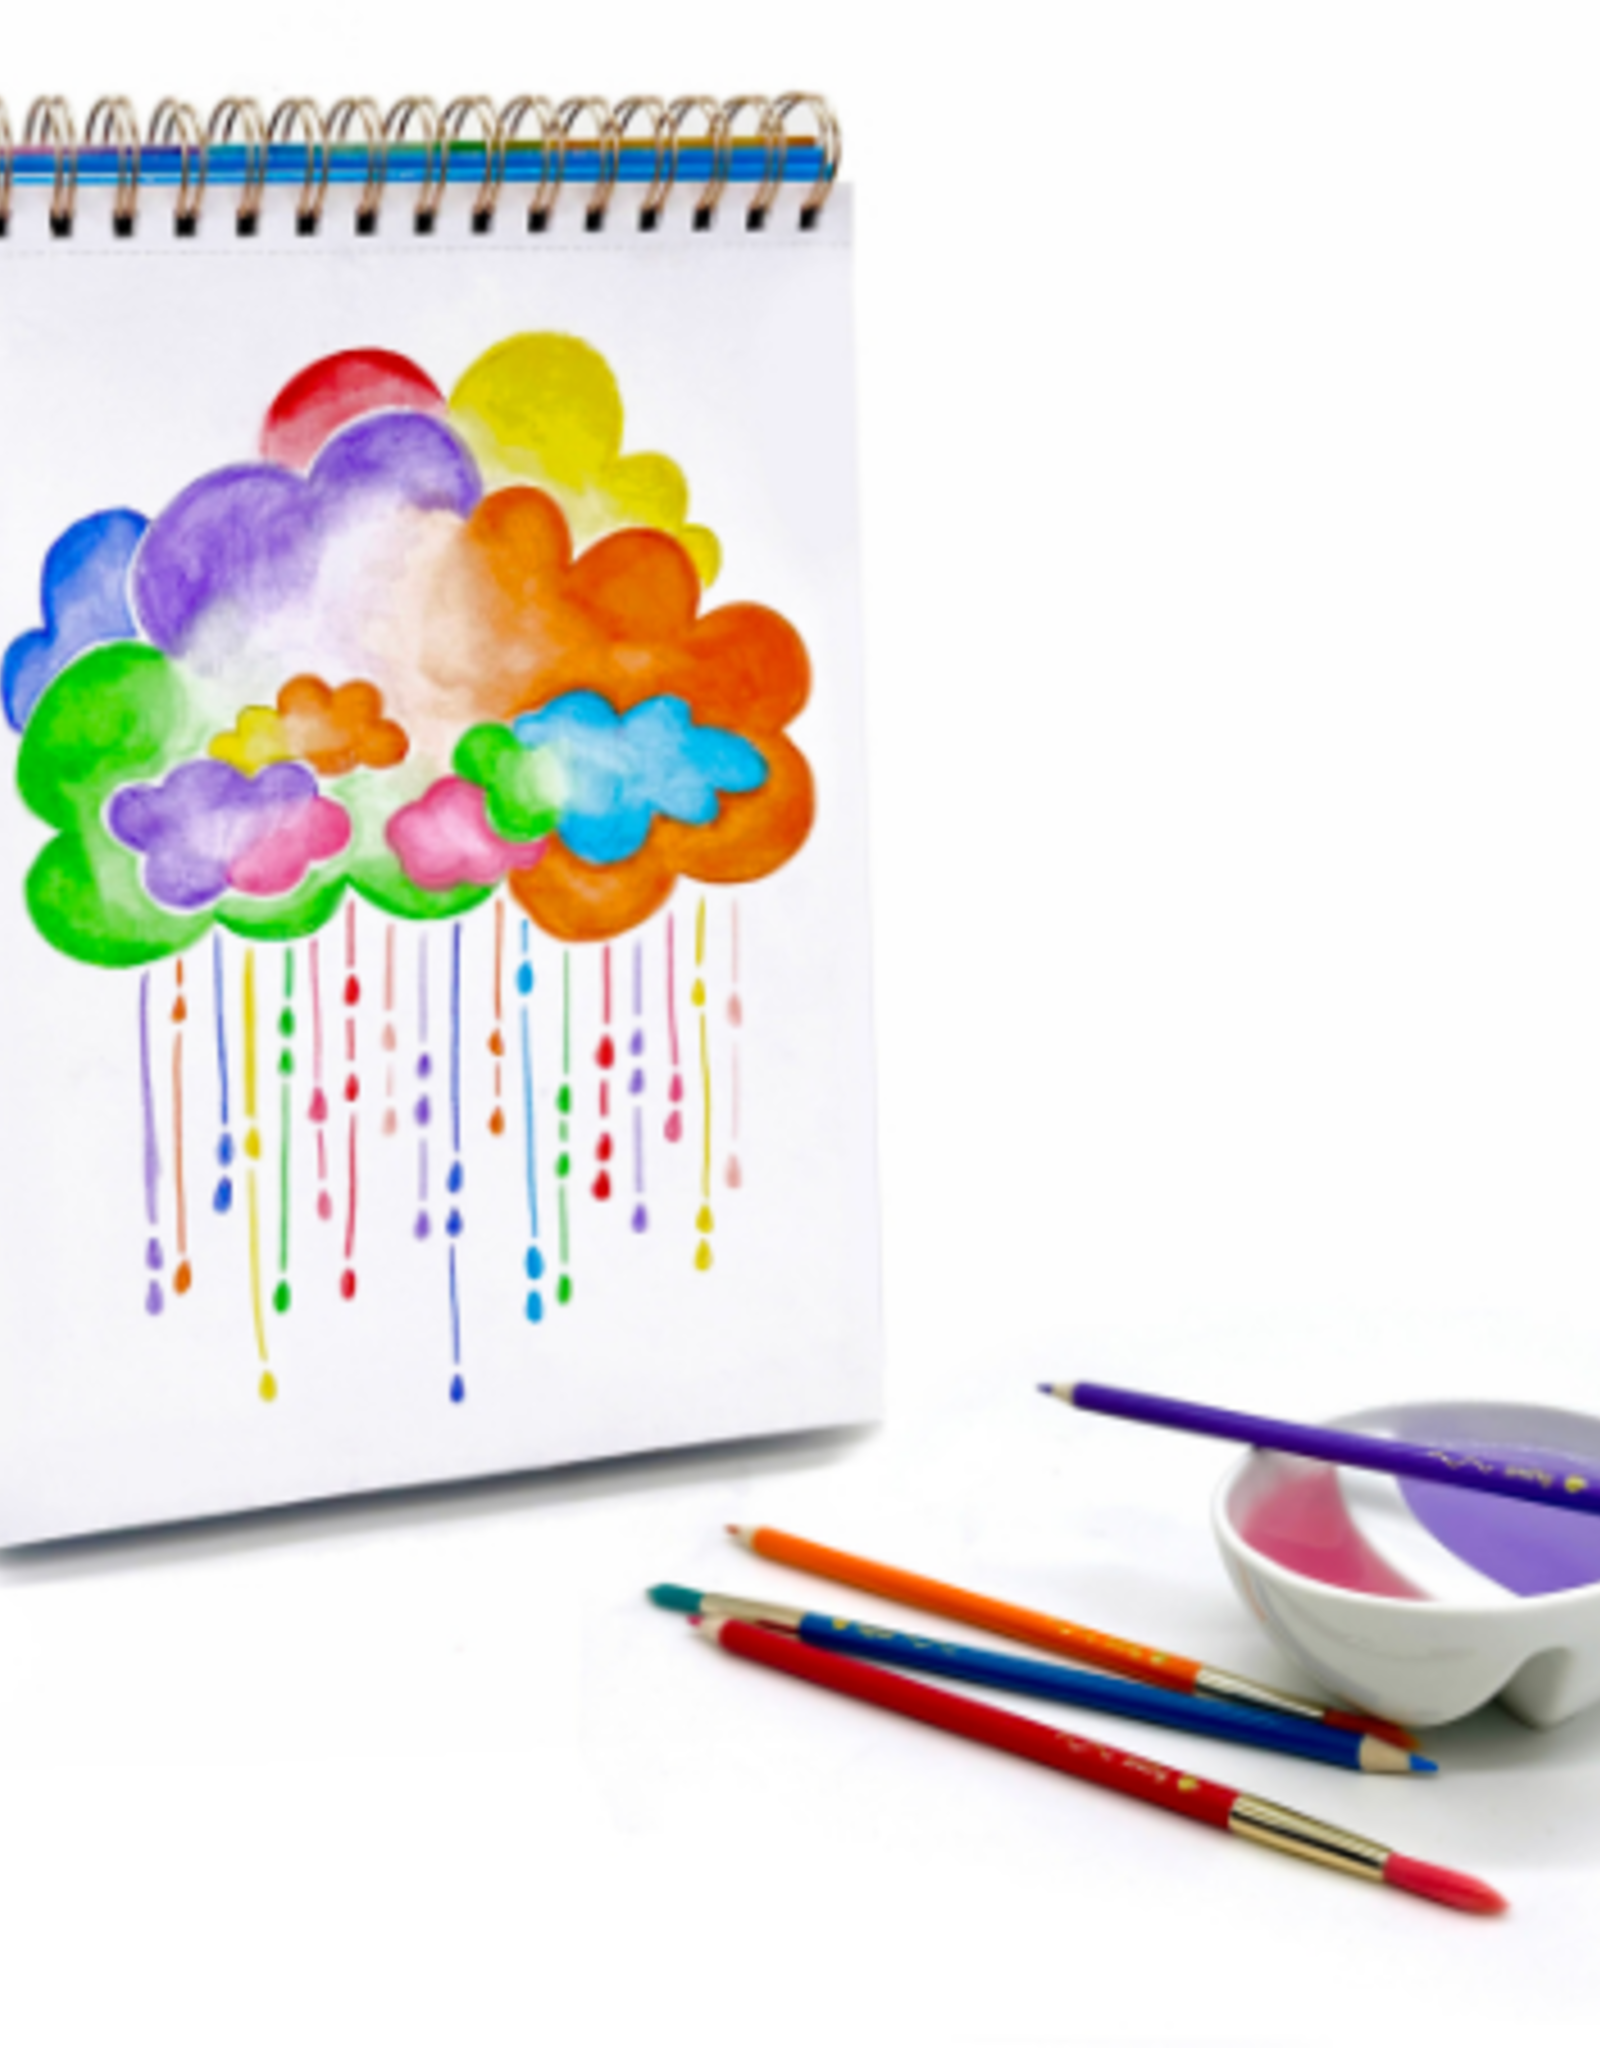 SNIFTY ARTIST EASEL WATERCOLOR PAD